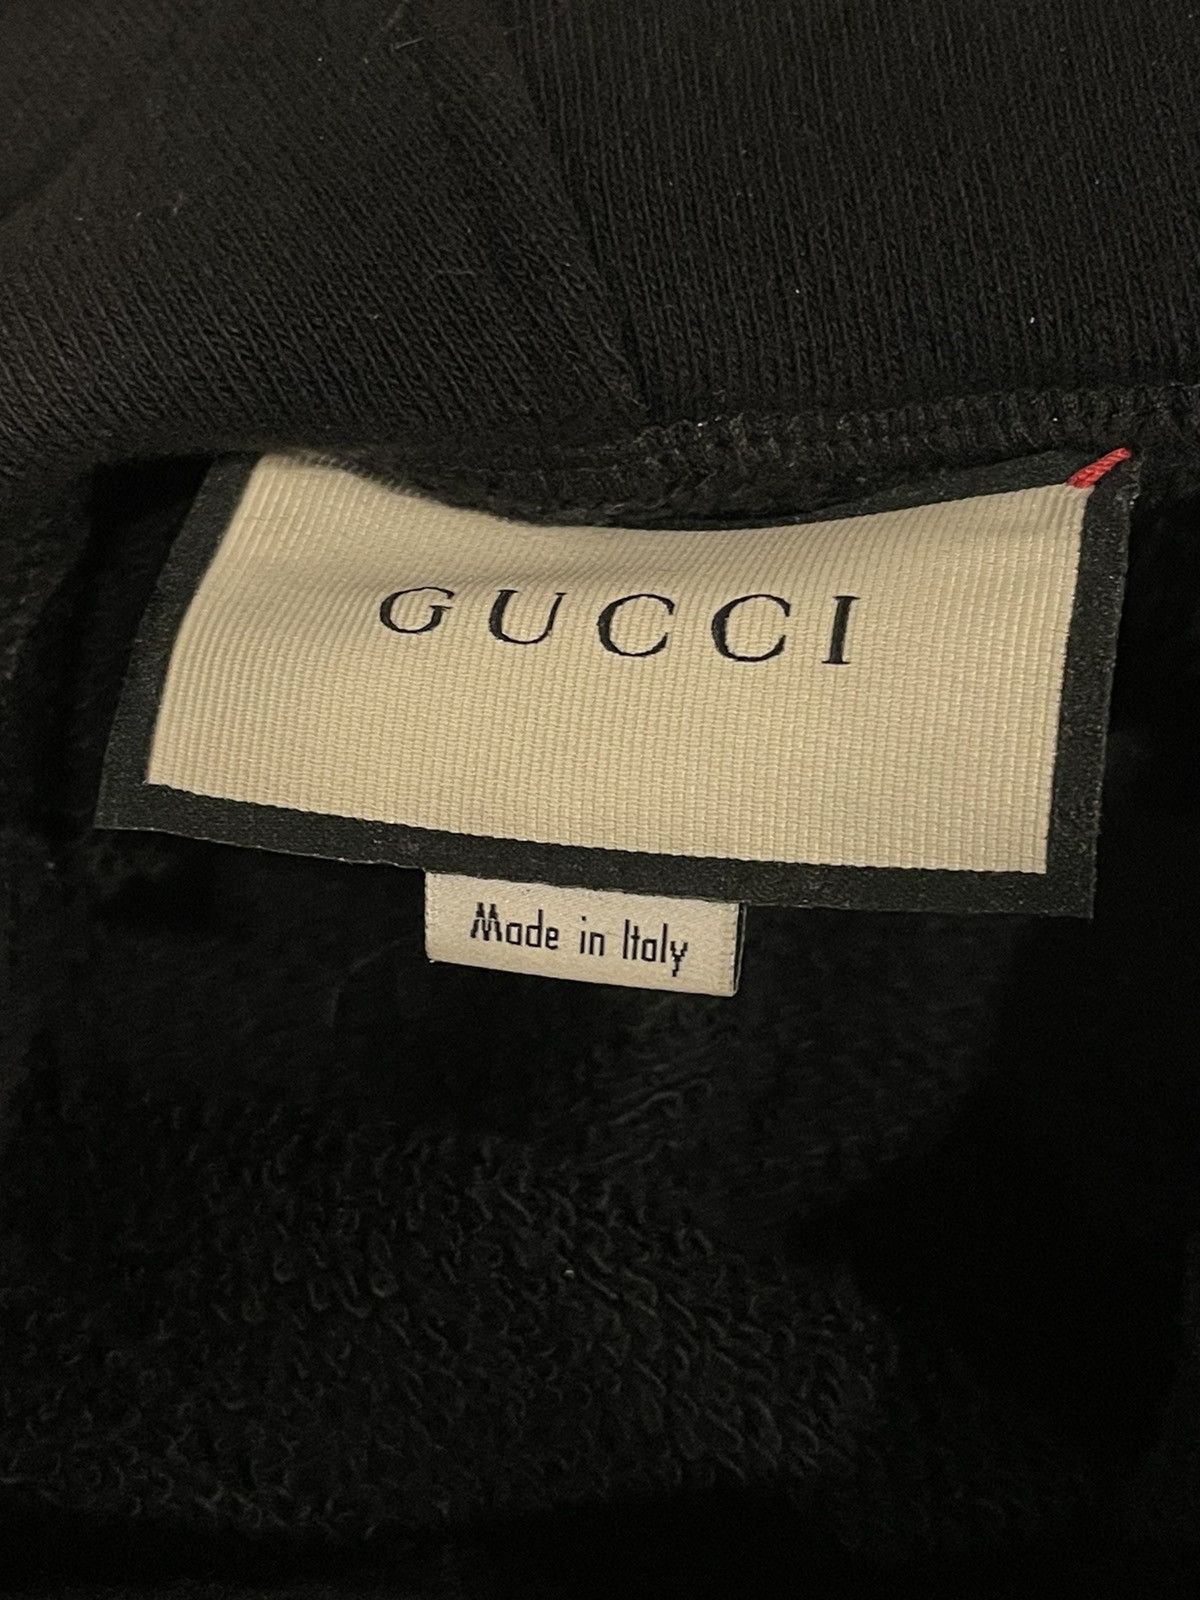 Gucci Loved Hoodie 💠final price drop💠 Size US L / EU 52-54 / 3 - 4 Preview